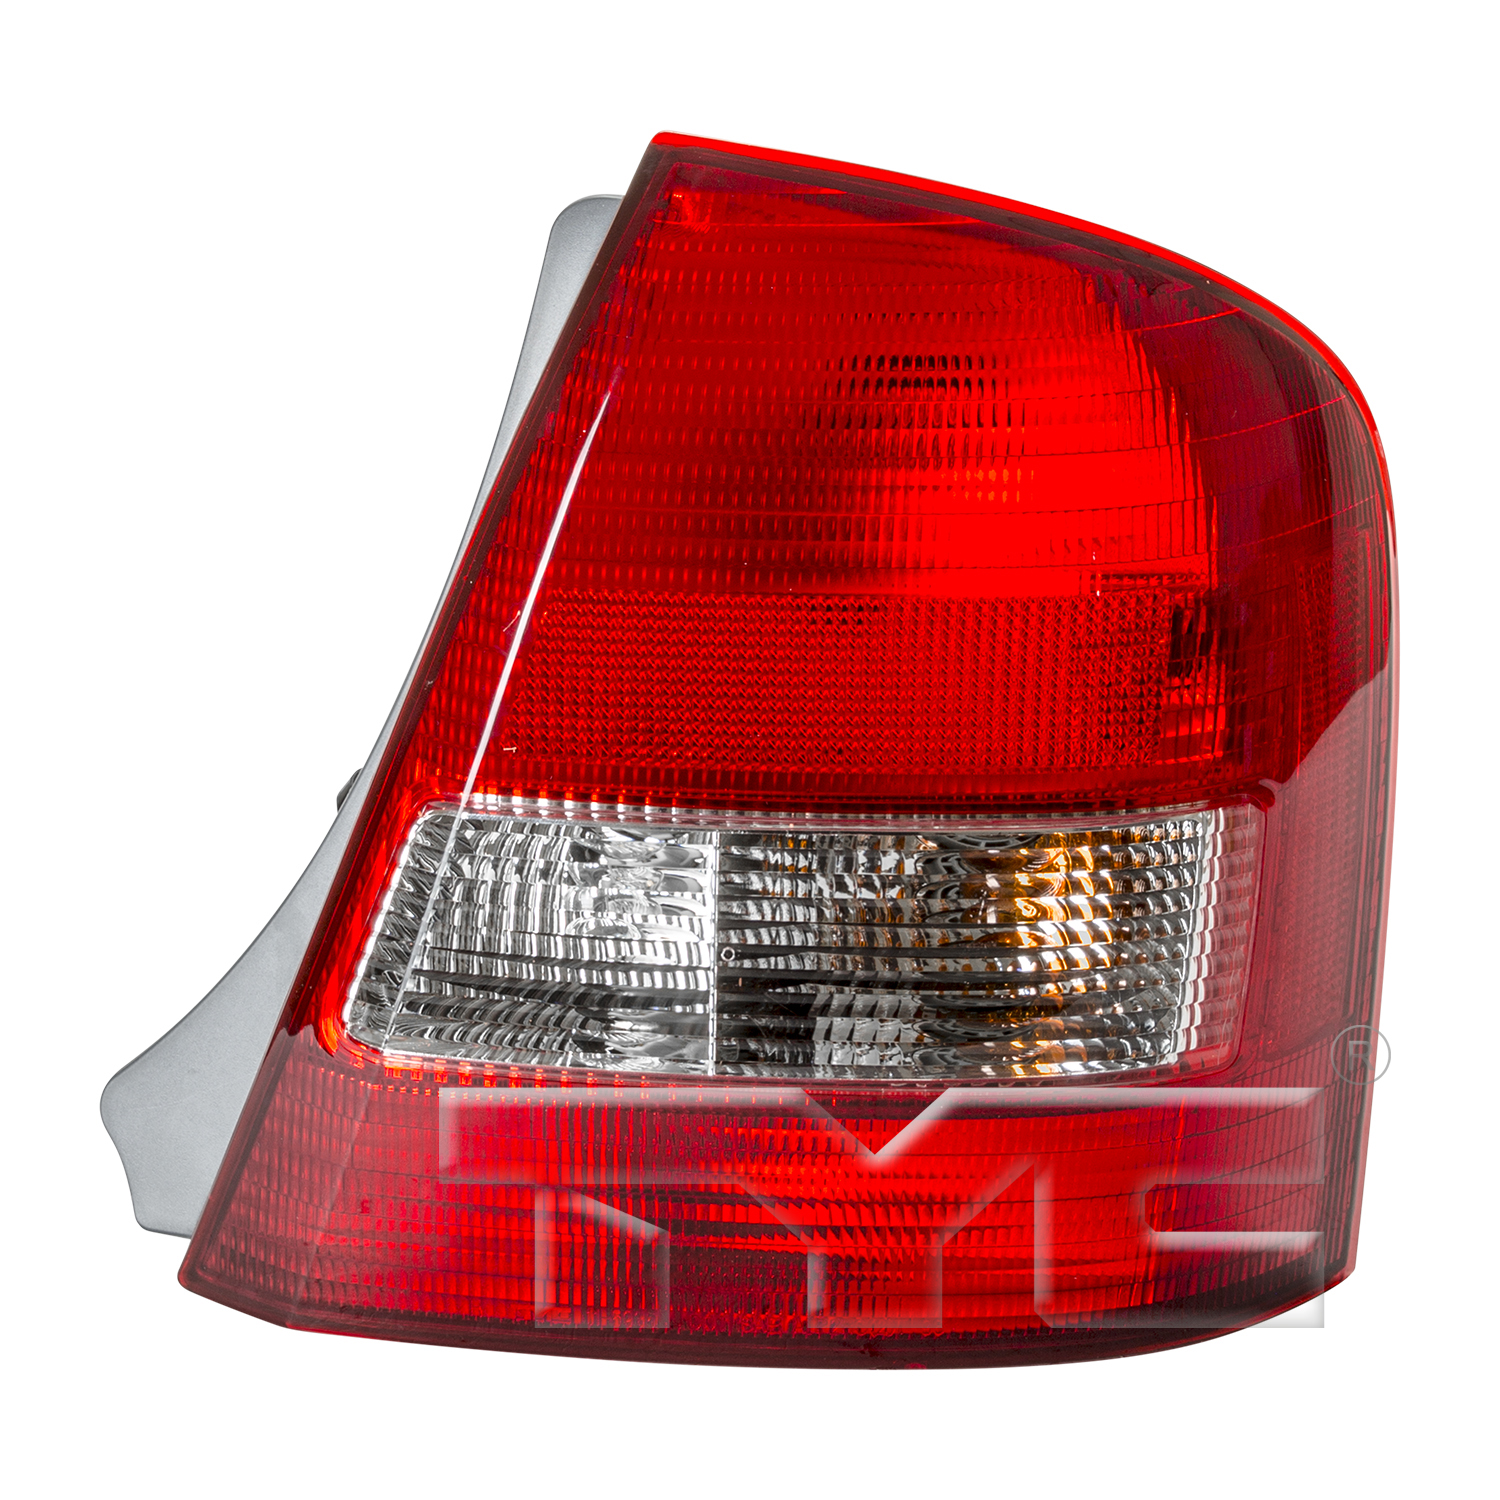 Aftermarket TAILLIGHTS for MAZDA - PROTEGE, PROTEGE,99-01,RT Taillamp assy